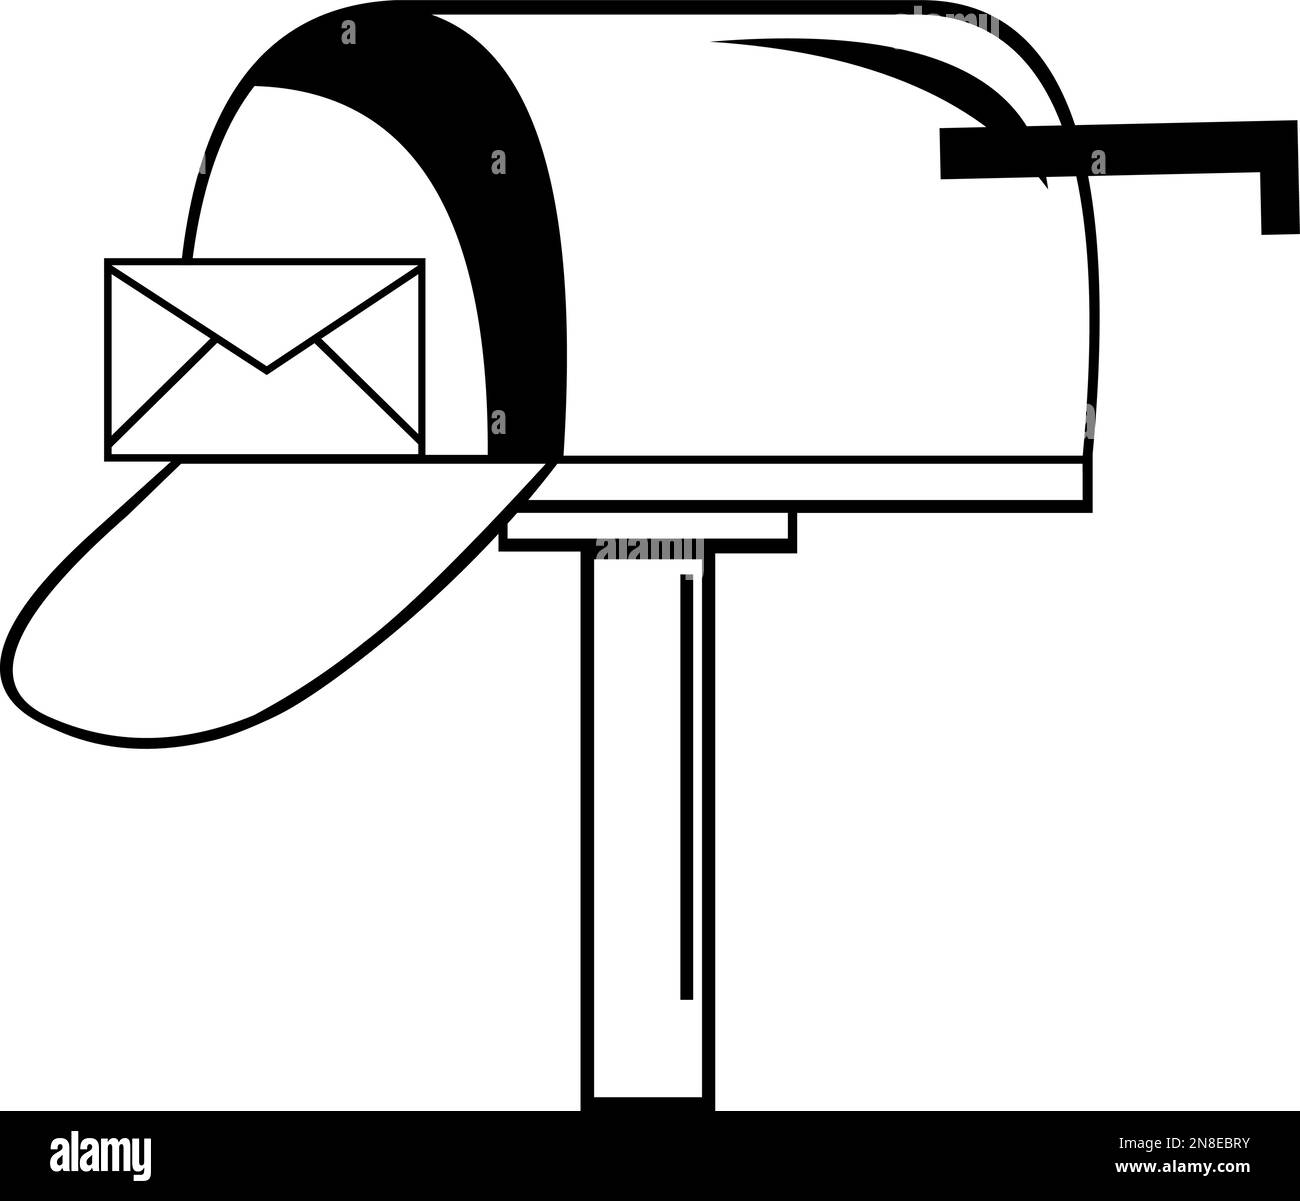 vector icon illustration of a mailbox with a letter envelope, drawn in black and white Stock Vector